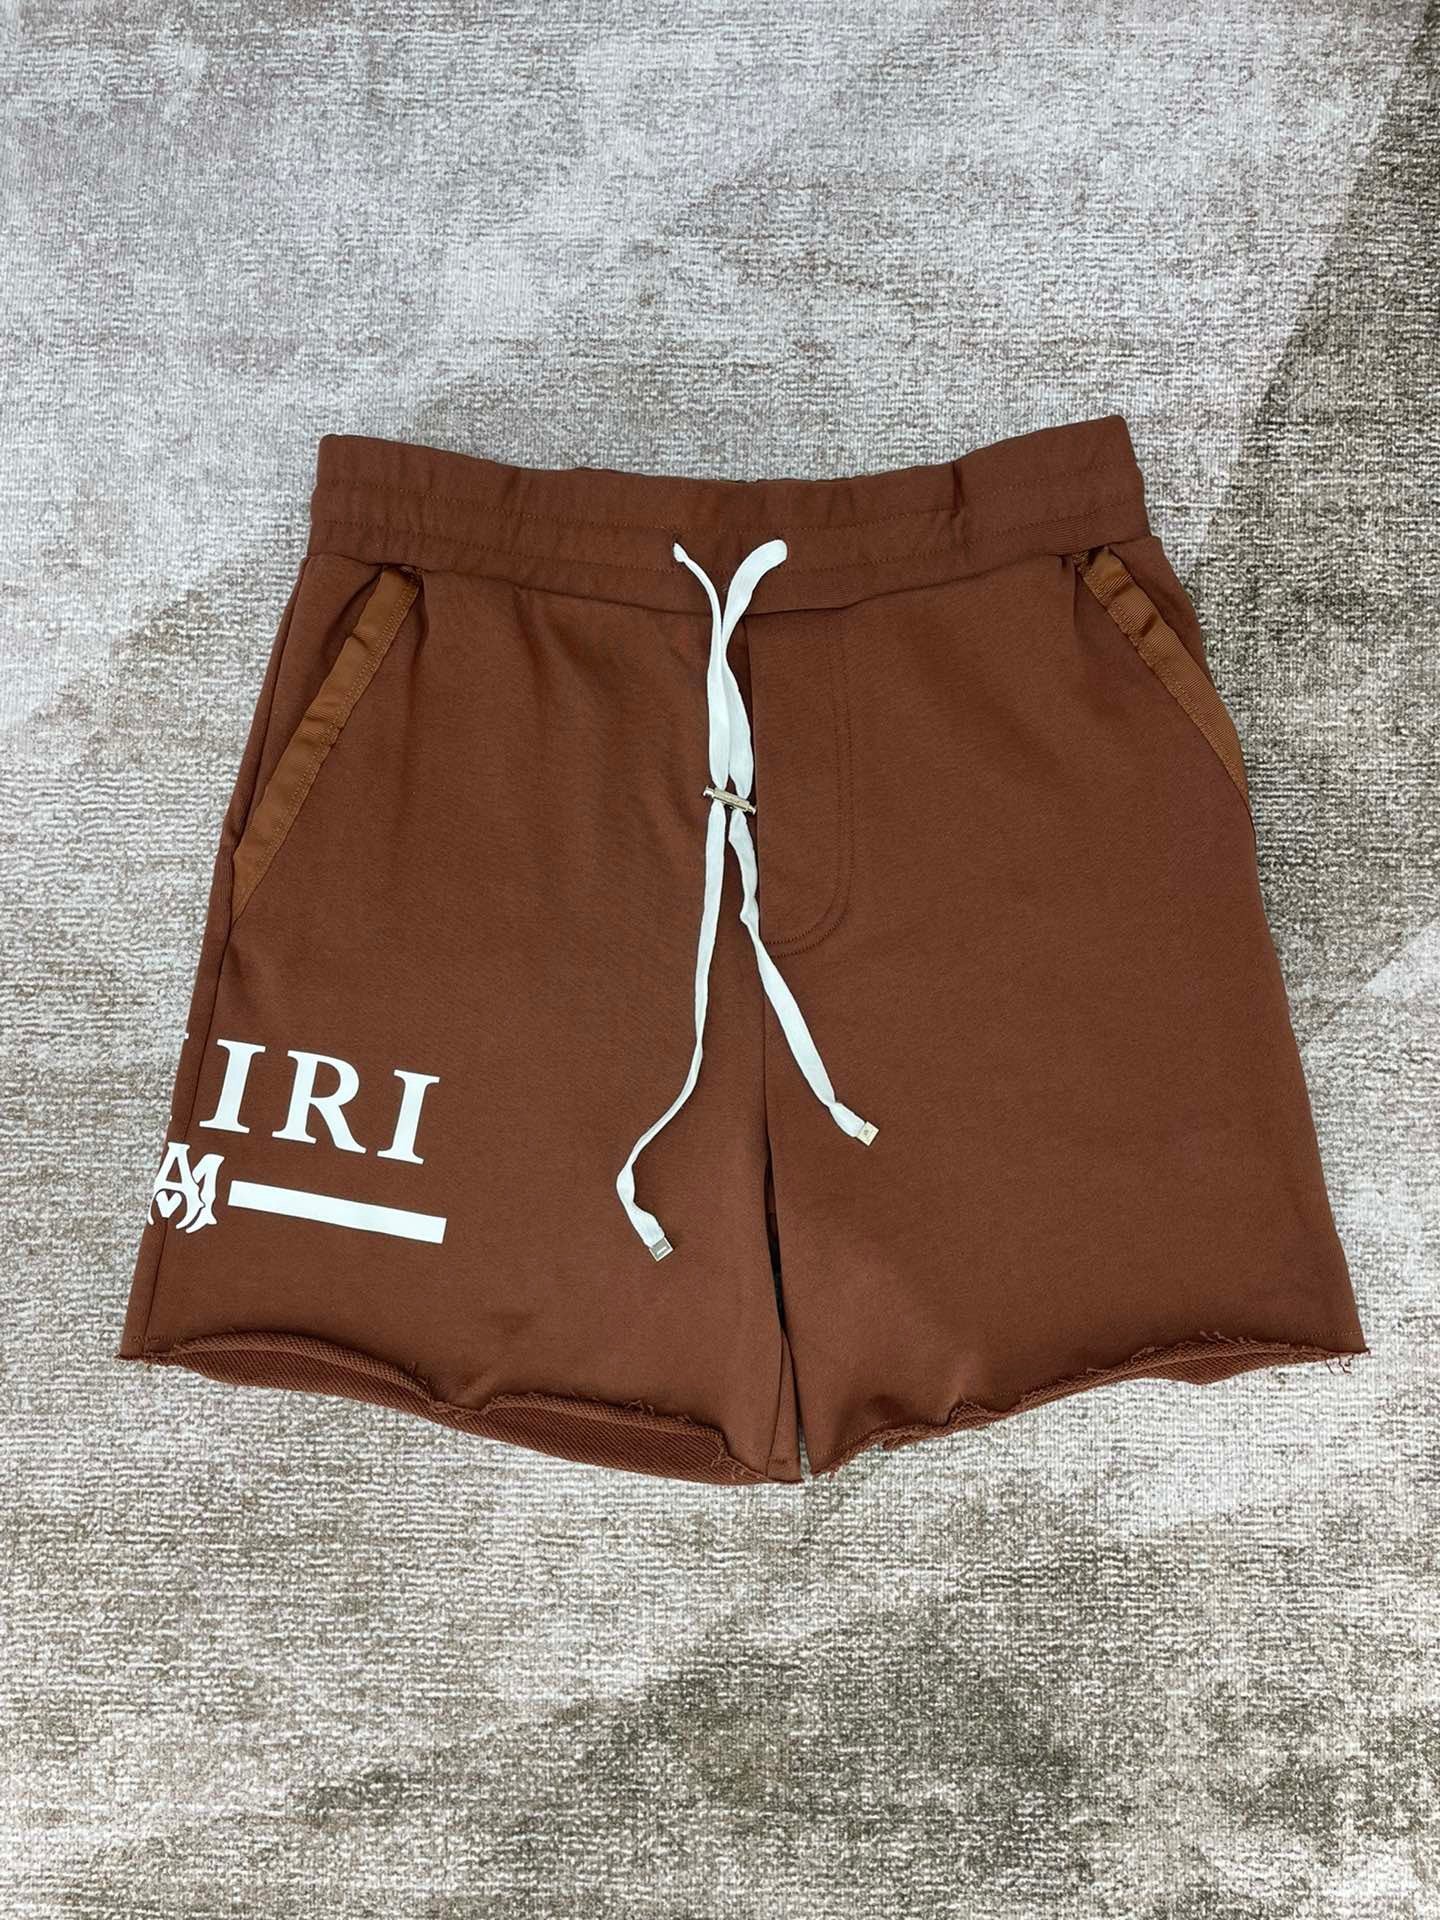 Black and Brown Short